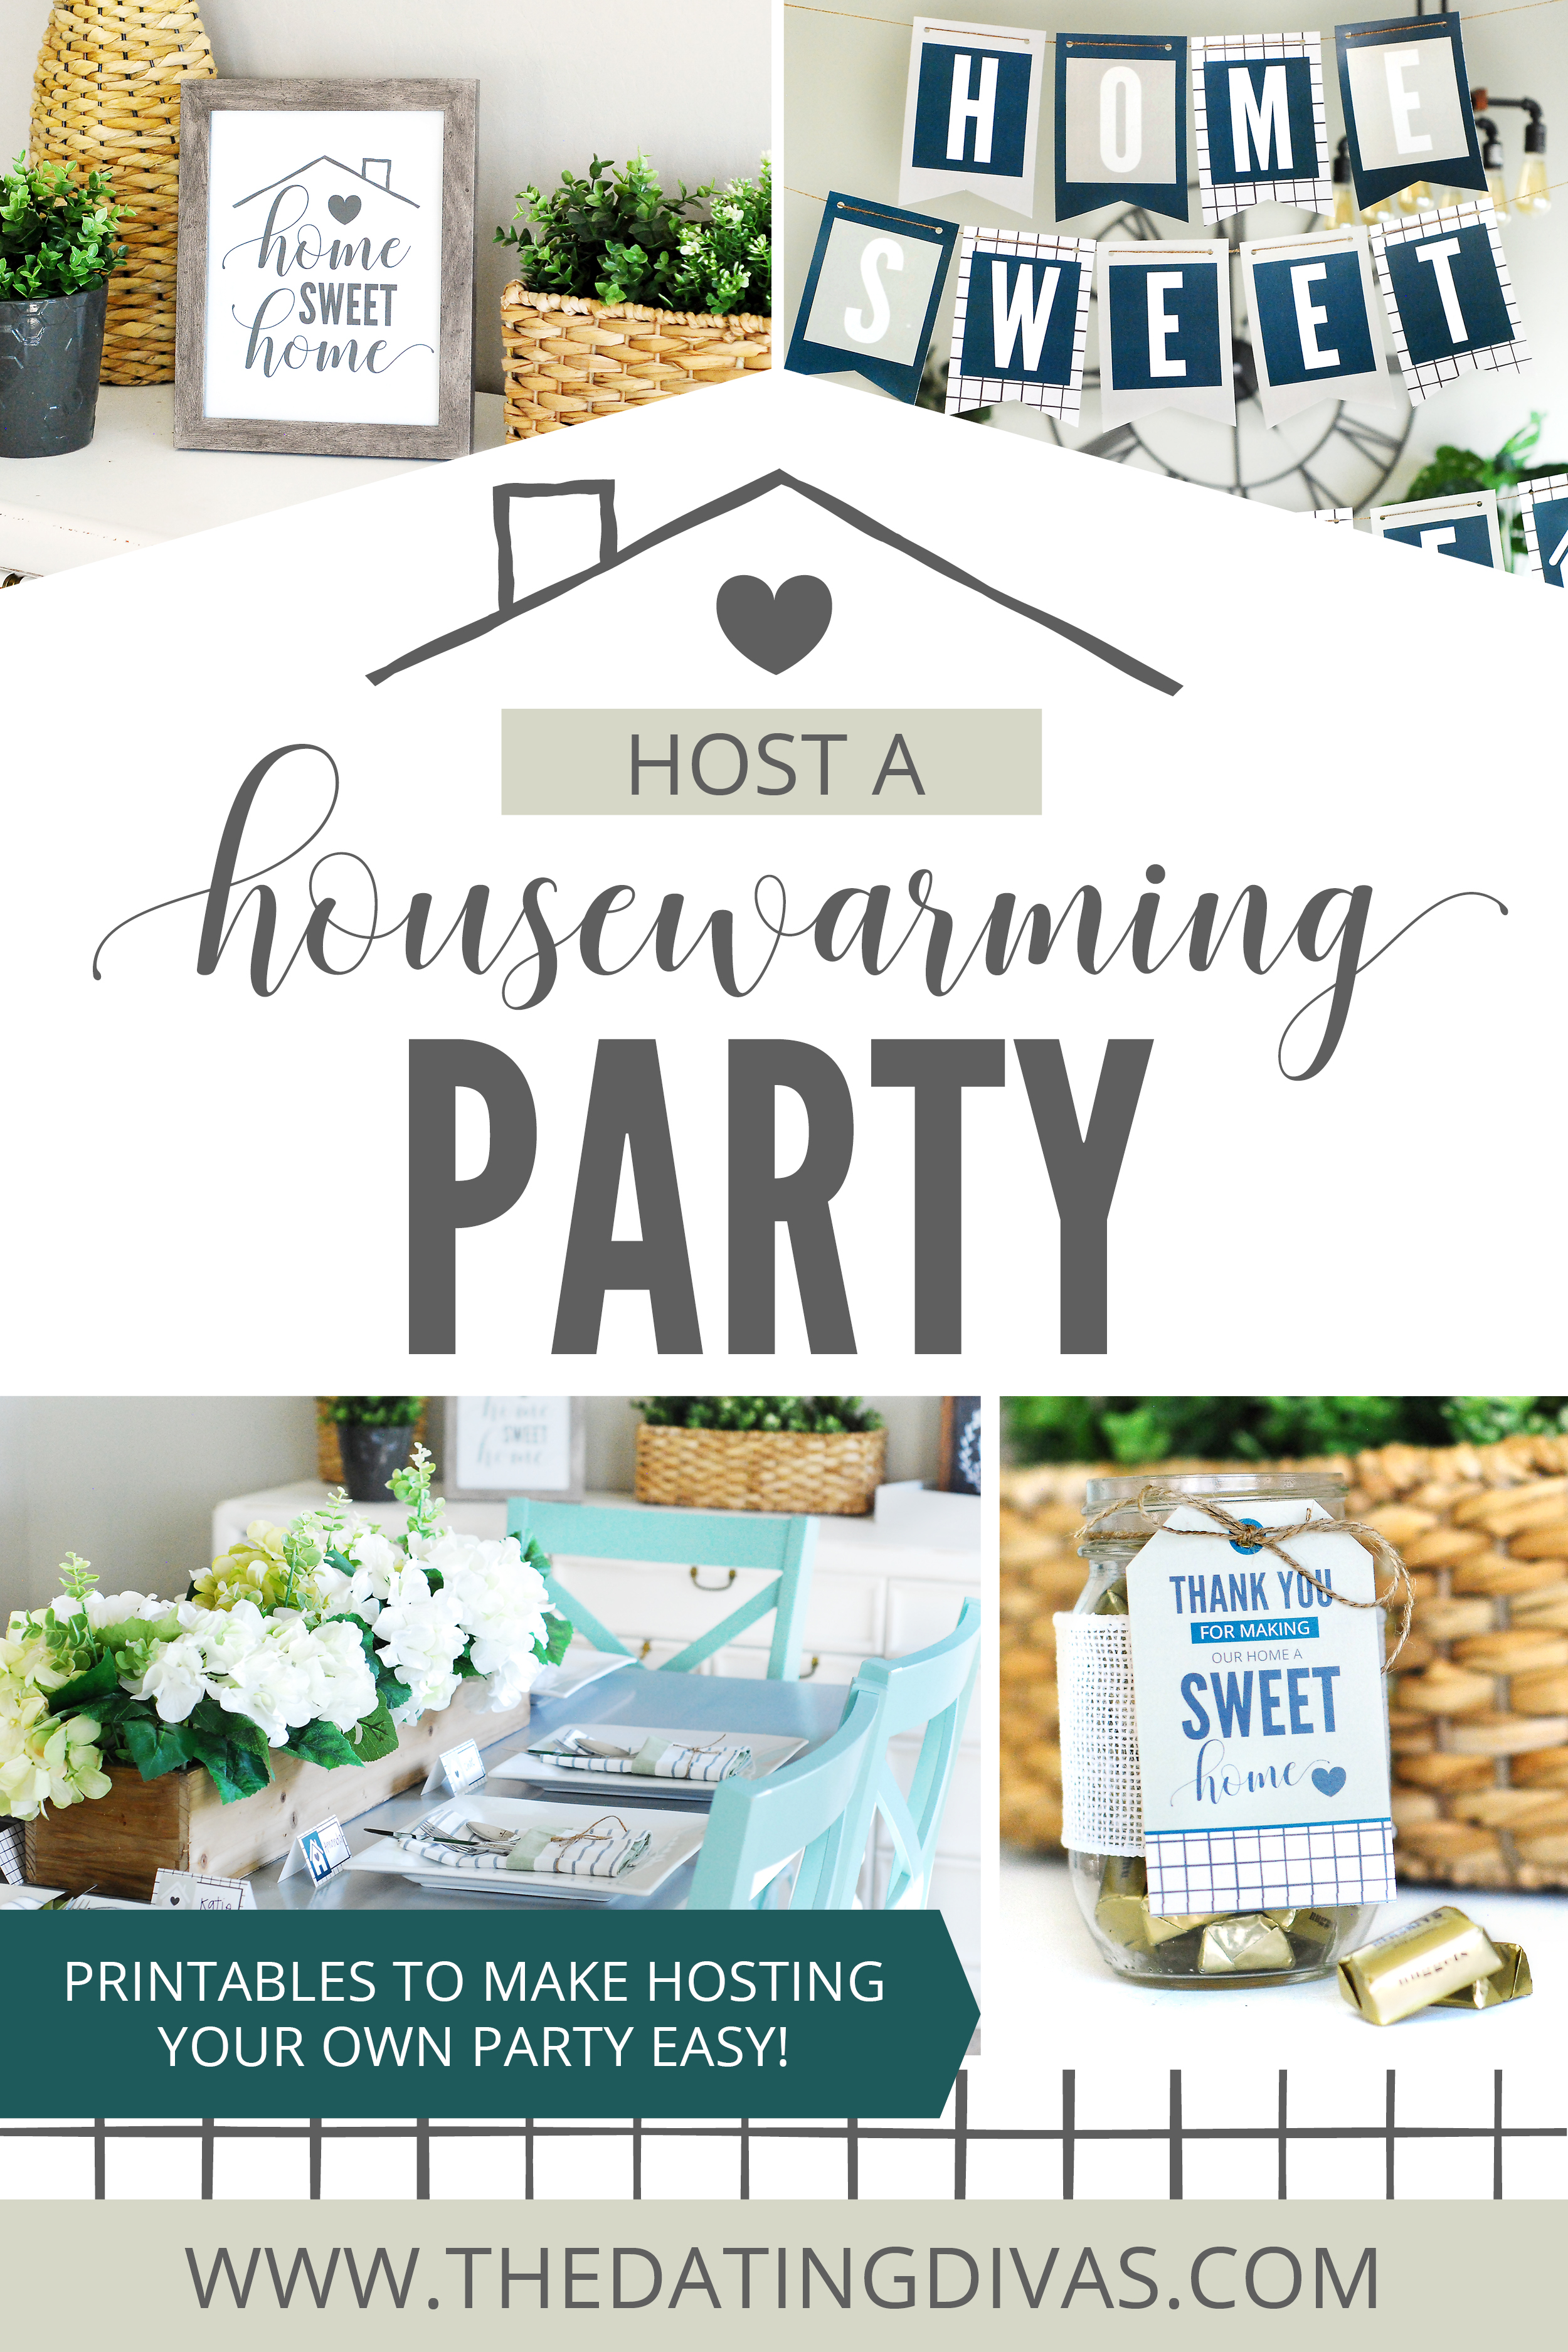 Housewarming party host kit includes printable invitations decor, a unique game, and more! Makes hosting a housewarming party easy! #housewarmingparty #housewarming #datingdivas #HostaHousewarmingParty